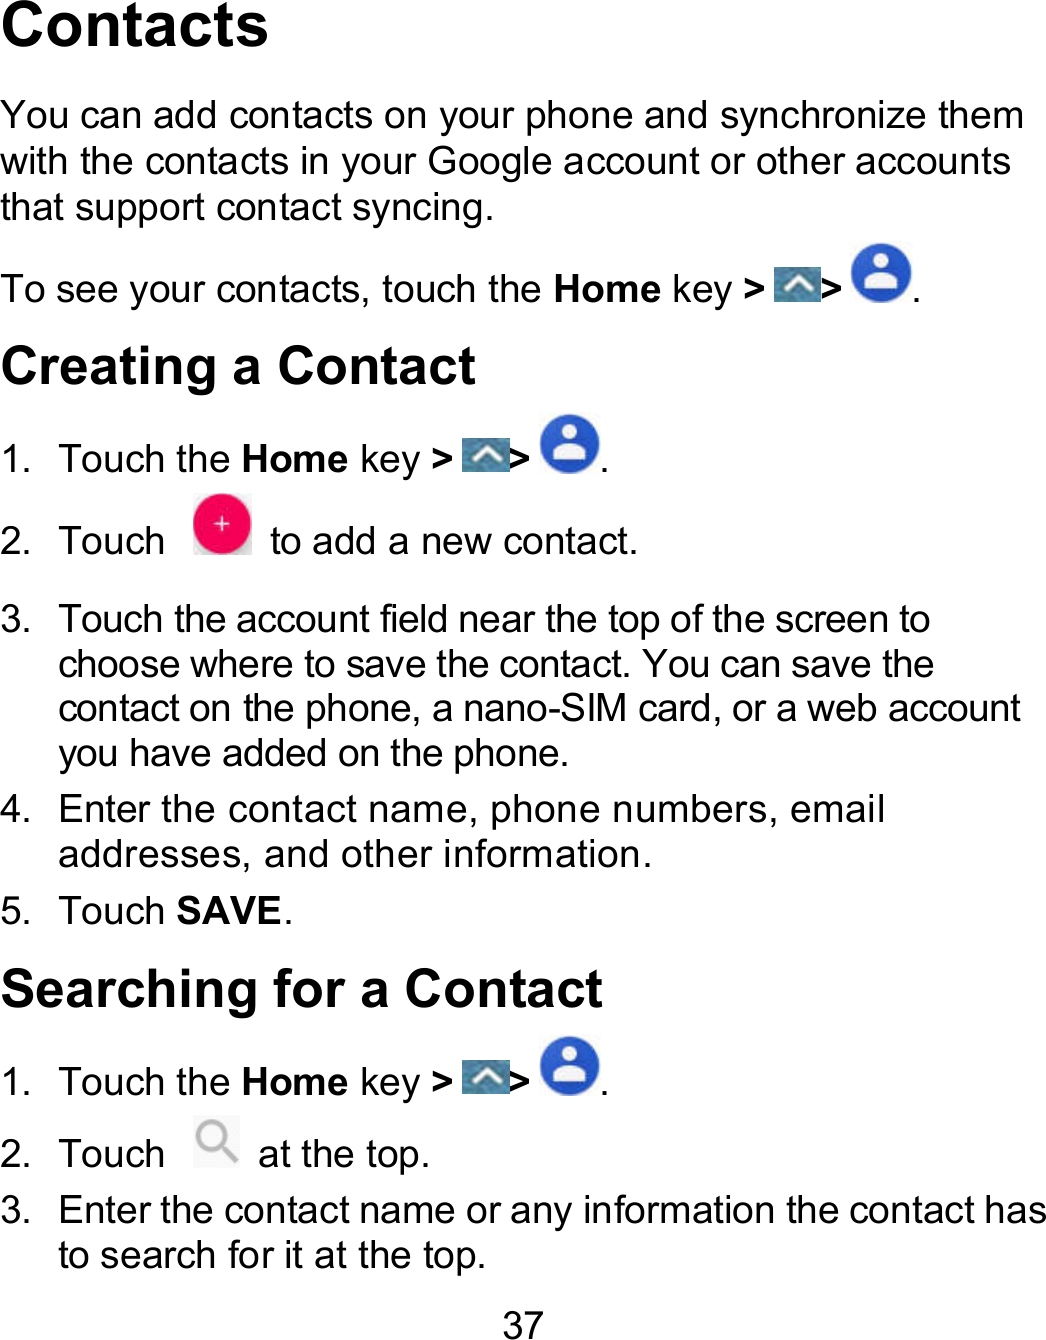 37 Contacts You can add contacts on your phone and synchronize them with the contacts in your Google account or other accounts that support contact syncing.   To see your contacts, touch the Home key &gt; &gt; . Creating a Contact 1.  Touch the Home key &gt; &gt; . 2.  Touch    to add a new contact. 3.  Touch the account field near the top of the screen to choose where to save the contact. You can save the contact on the phone, a nano-SIM card, or a web account you have added on the phone. 4.  Enter the contact name, phone numbers, email addresses, and other information. 5.  Touch SAVE. Searching for a Contact 1.  Touch the Home key &gt; &gt; . 2.  Touch    at the top. 3.  Enter the contact name or any information the contact has to search for it at the top.   